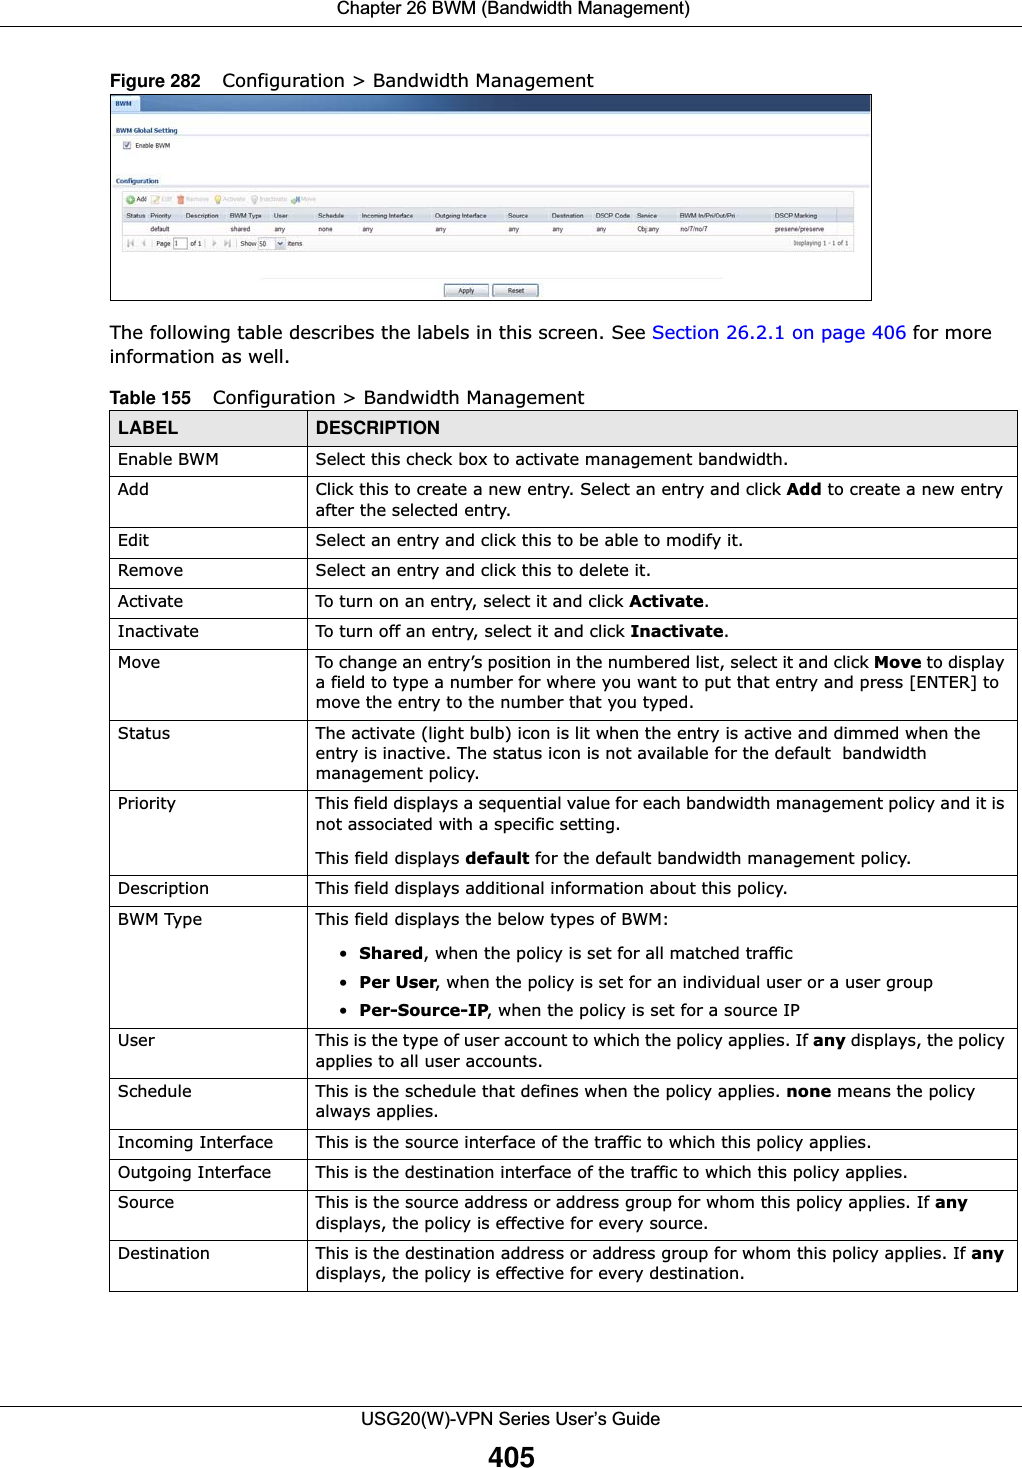  Chapter 26 BWM (Bandwidth Management)USG20(W)-VPN Series User’s Guide405Figure 282    Configuration &gt; Bandwidth ManagementThe following table describes the labels in this screen. See Section 26.2.1 on page 406 for more information as well.  Table 155    Configuration &gt; Bandwidth ManagementLABEL DESCRIPTIONEnable BWM Select this check box to activate management bandwidth. Add Click this to create a new entry. Select an entry and click Add to create a new entry after the selected entry.Edit Select an entry and click this to be able to modify it. Remove Select an entry and click this to delete it.Activate To turn on an entry, select it and click Activate.Inactivate To turn off an entry, select it and click Inactivate.Move To change an entry’s position in the numbered list, select it and click Move to display a field to type a number for where you want to put that entry and press [ENTER] to move the entry to the number that you typed.Status The activate (light bulb) icon is lit when the entry is active and dimmed when the entry is inactive. The status icon is not available for the default  bandwidth management policy.Priority This field displays a sequential value for each bandwidth management policy and it is not associated with a specific setting.This field displays default for the default bandwidth management policy.Description This field displays additional information about this policy.BWM Type This field displays the below types of BWM:•Shared, when the policy is set for all matched traffic•Per User, when the policy is set for an individual user or a user group•Per-Source-IP, when the policy is set for a source IPUser This is the type of user account to which the policy applies. If any displays, the policy applies to all user accounts.Schedule This is the schedule that defines when the policy applies. none means the policy always applies.Incoming Interface This is the source interface of the traffic to which this policy applies.Outgoing Interface This is the destination interface of the traffic to which this policy applies.Source This is the source address or address group for whom this policy applies. If any displays, the policy is effective for every source.Destination This is the destination address or address group for whom this policy applies. If any displays, the policy is effective for every destination.